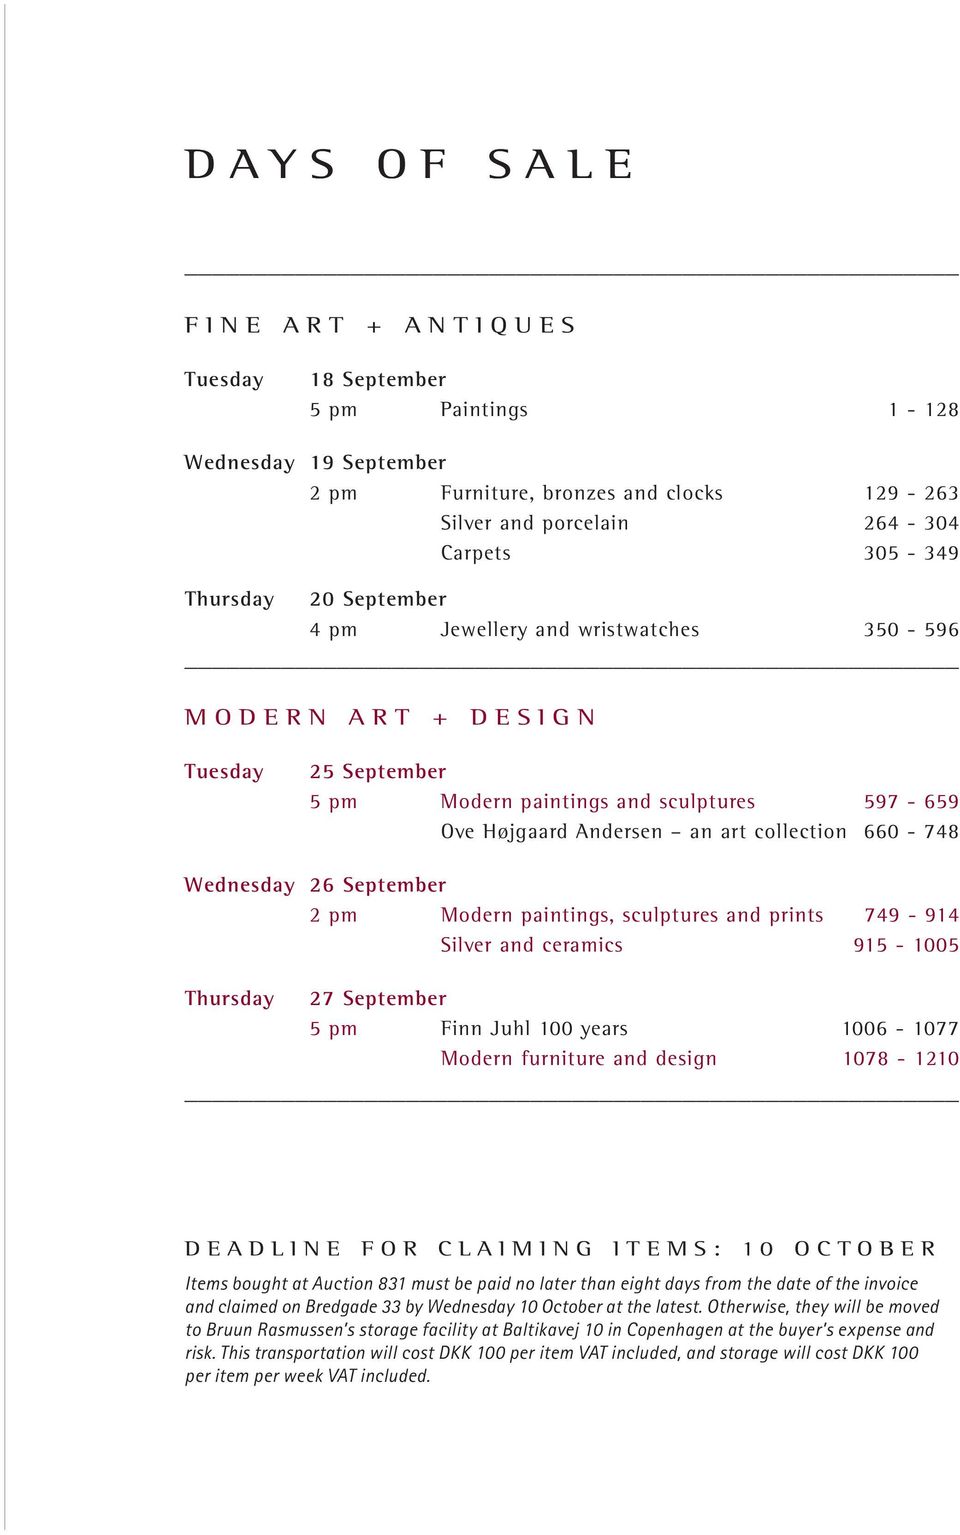 Wednesday 26 September 2 pm Modern paintings, sculptures and prints 749-914 Silver and ceramics 915-1005 Thursday 27 September 5 pm Finn Juhl 100 years 1006-1077 Modern furniture and design 1078-1210